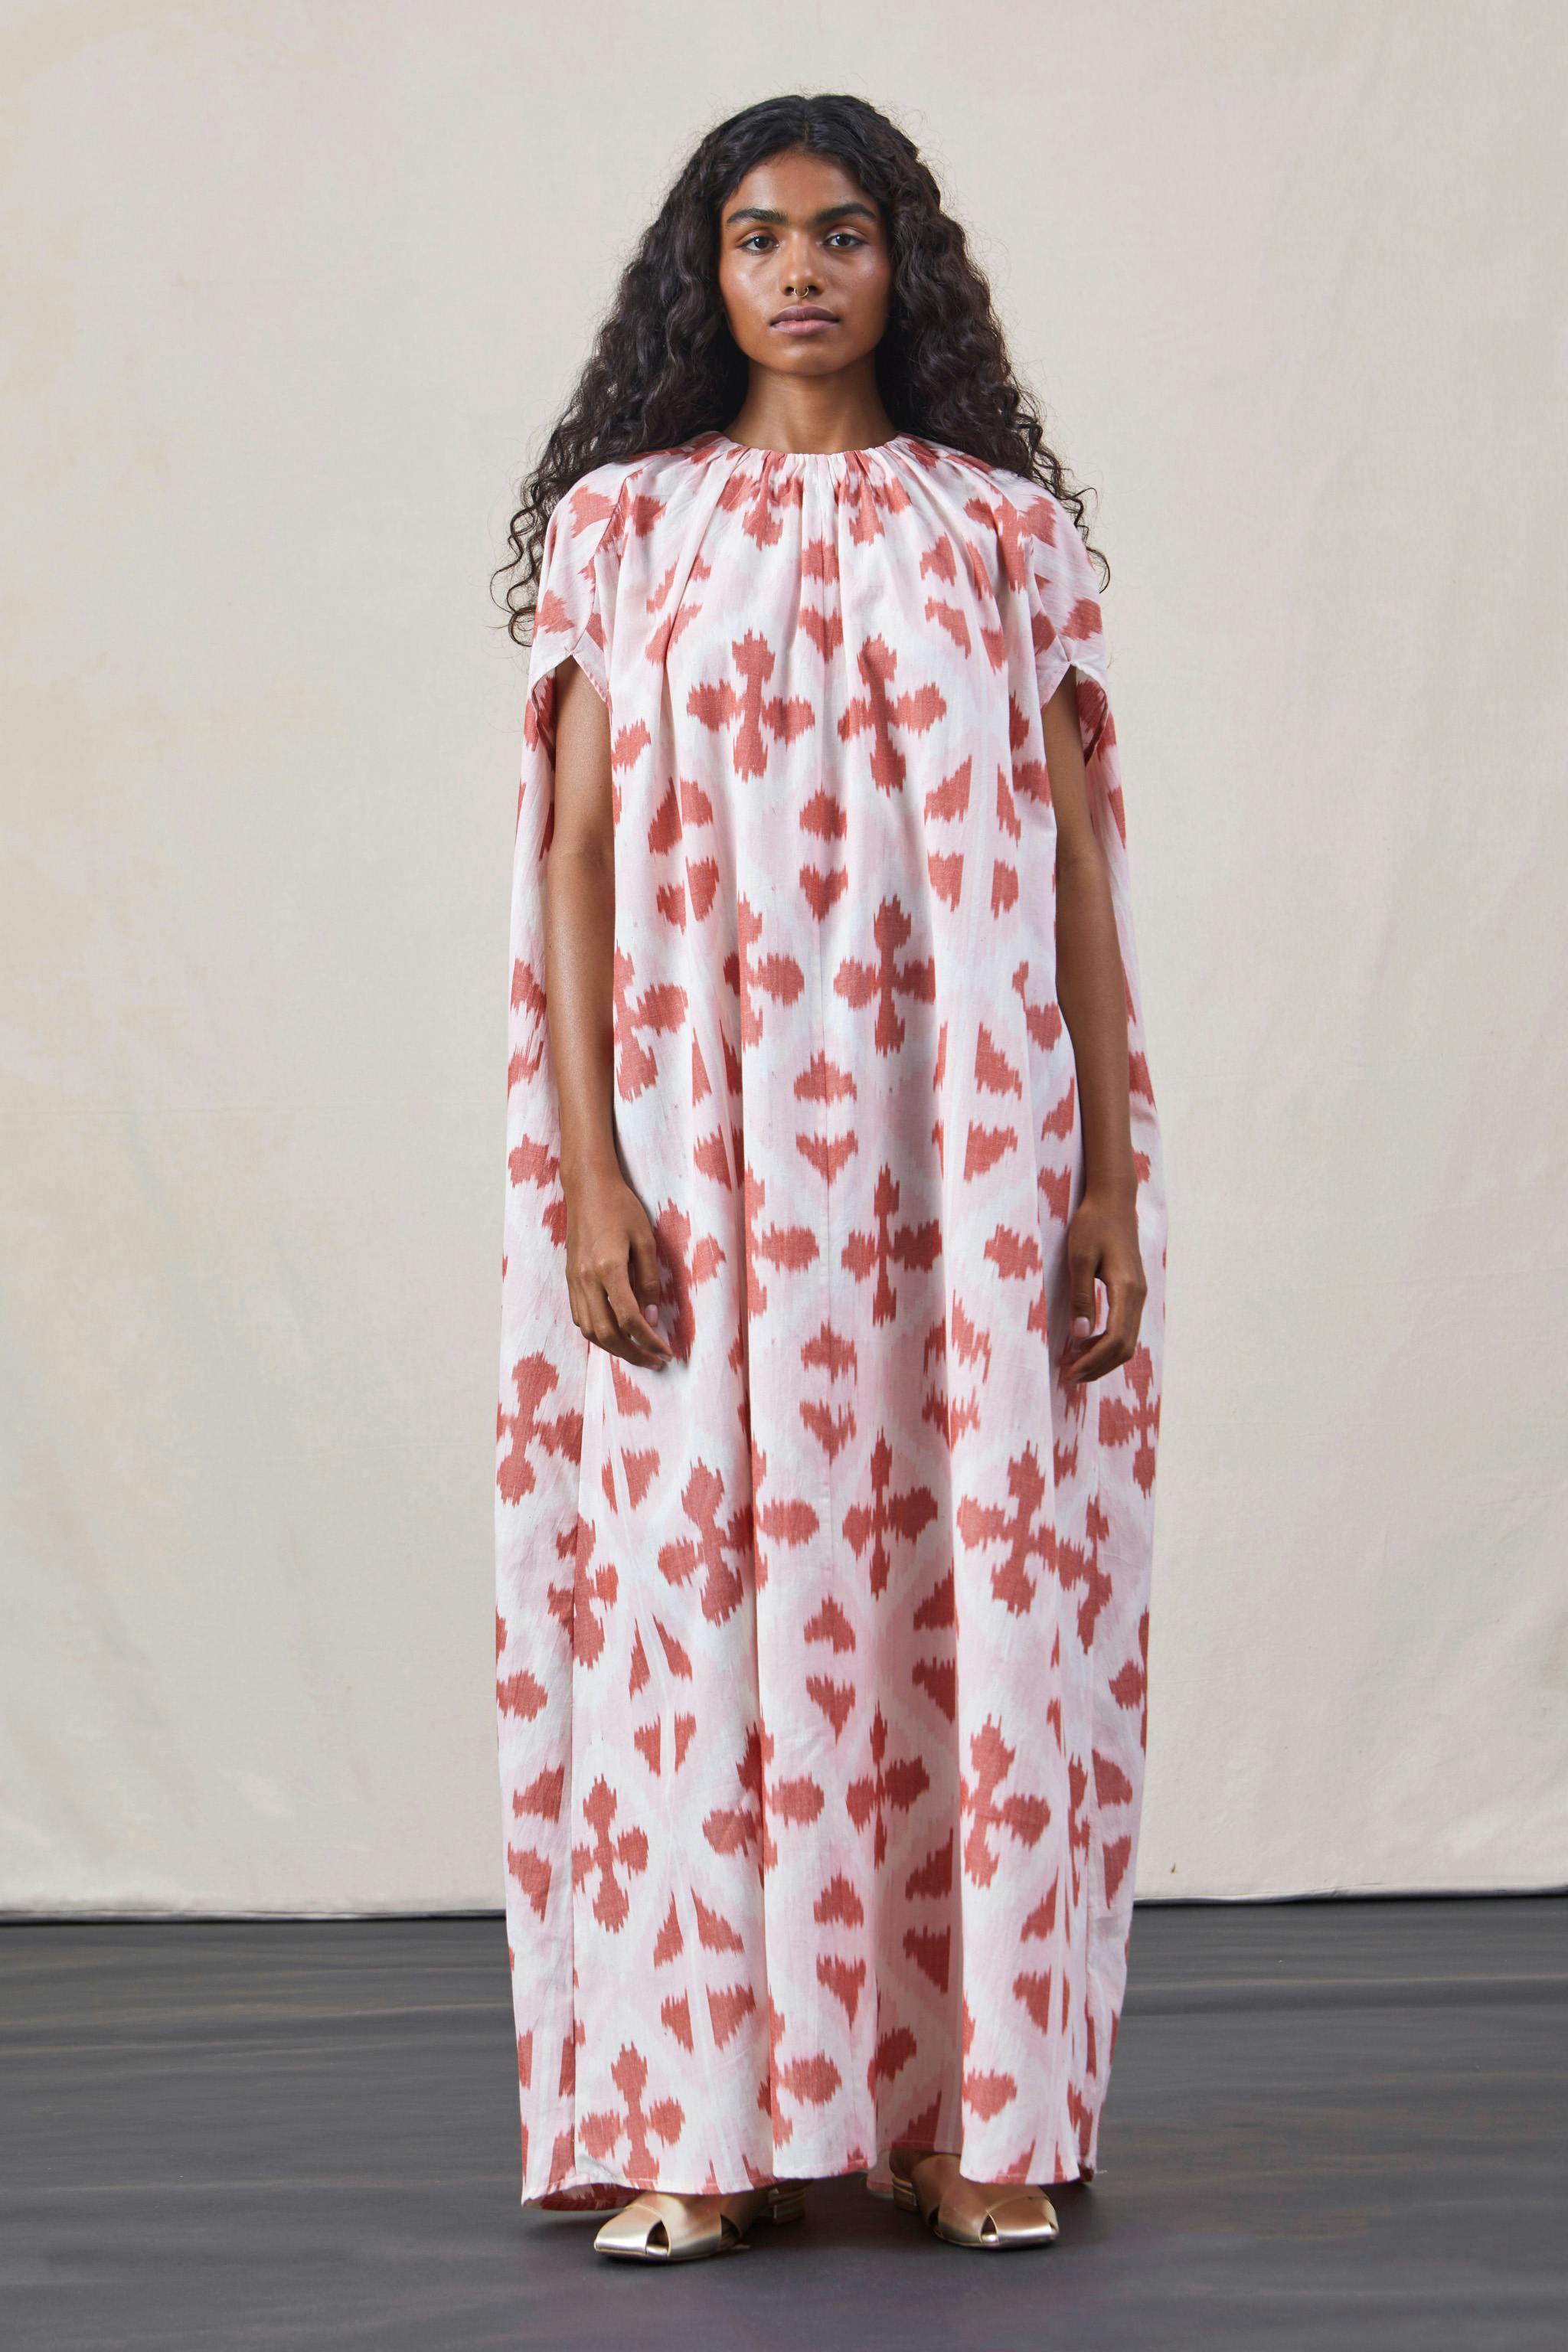 Cir - Ikat Dress Pink, a product by The Summer House